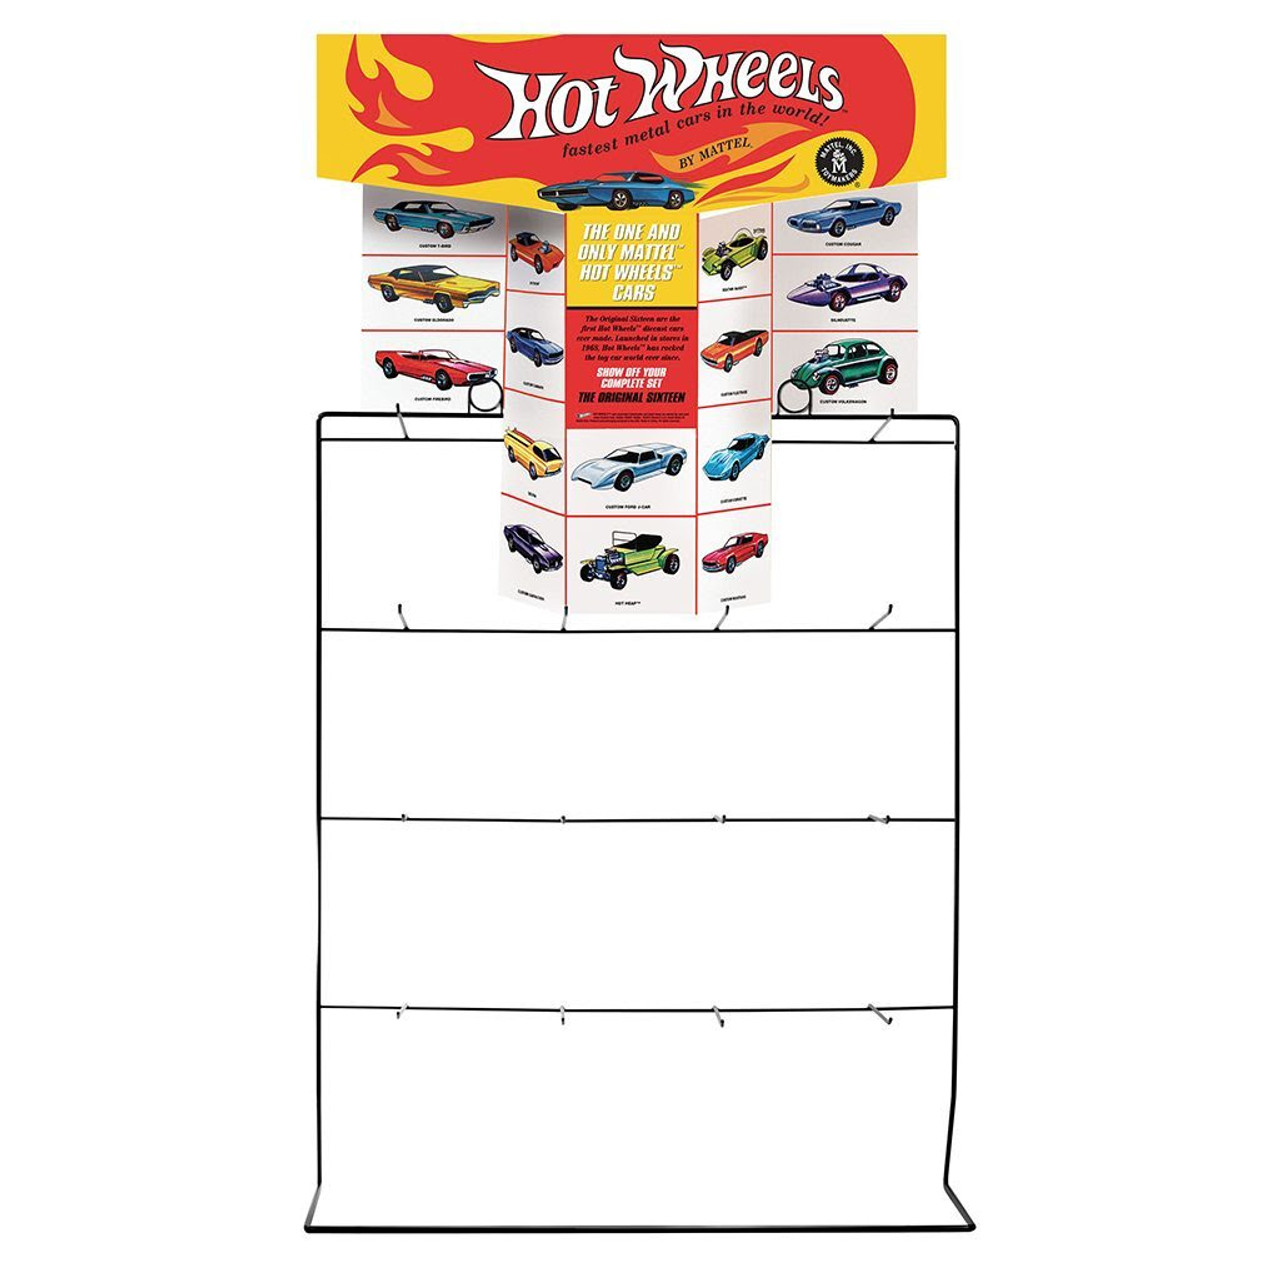 1/64 Hot Wheels Counter Display Rack (car models NOT included)